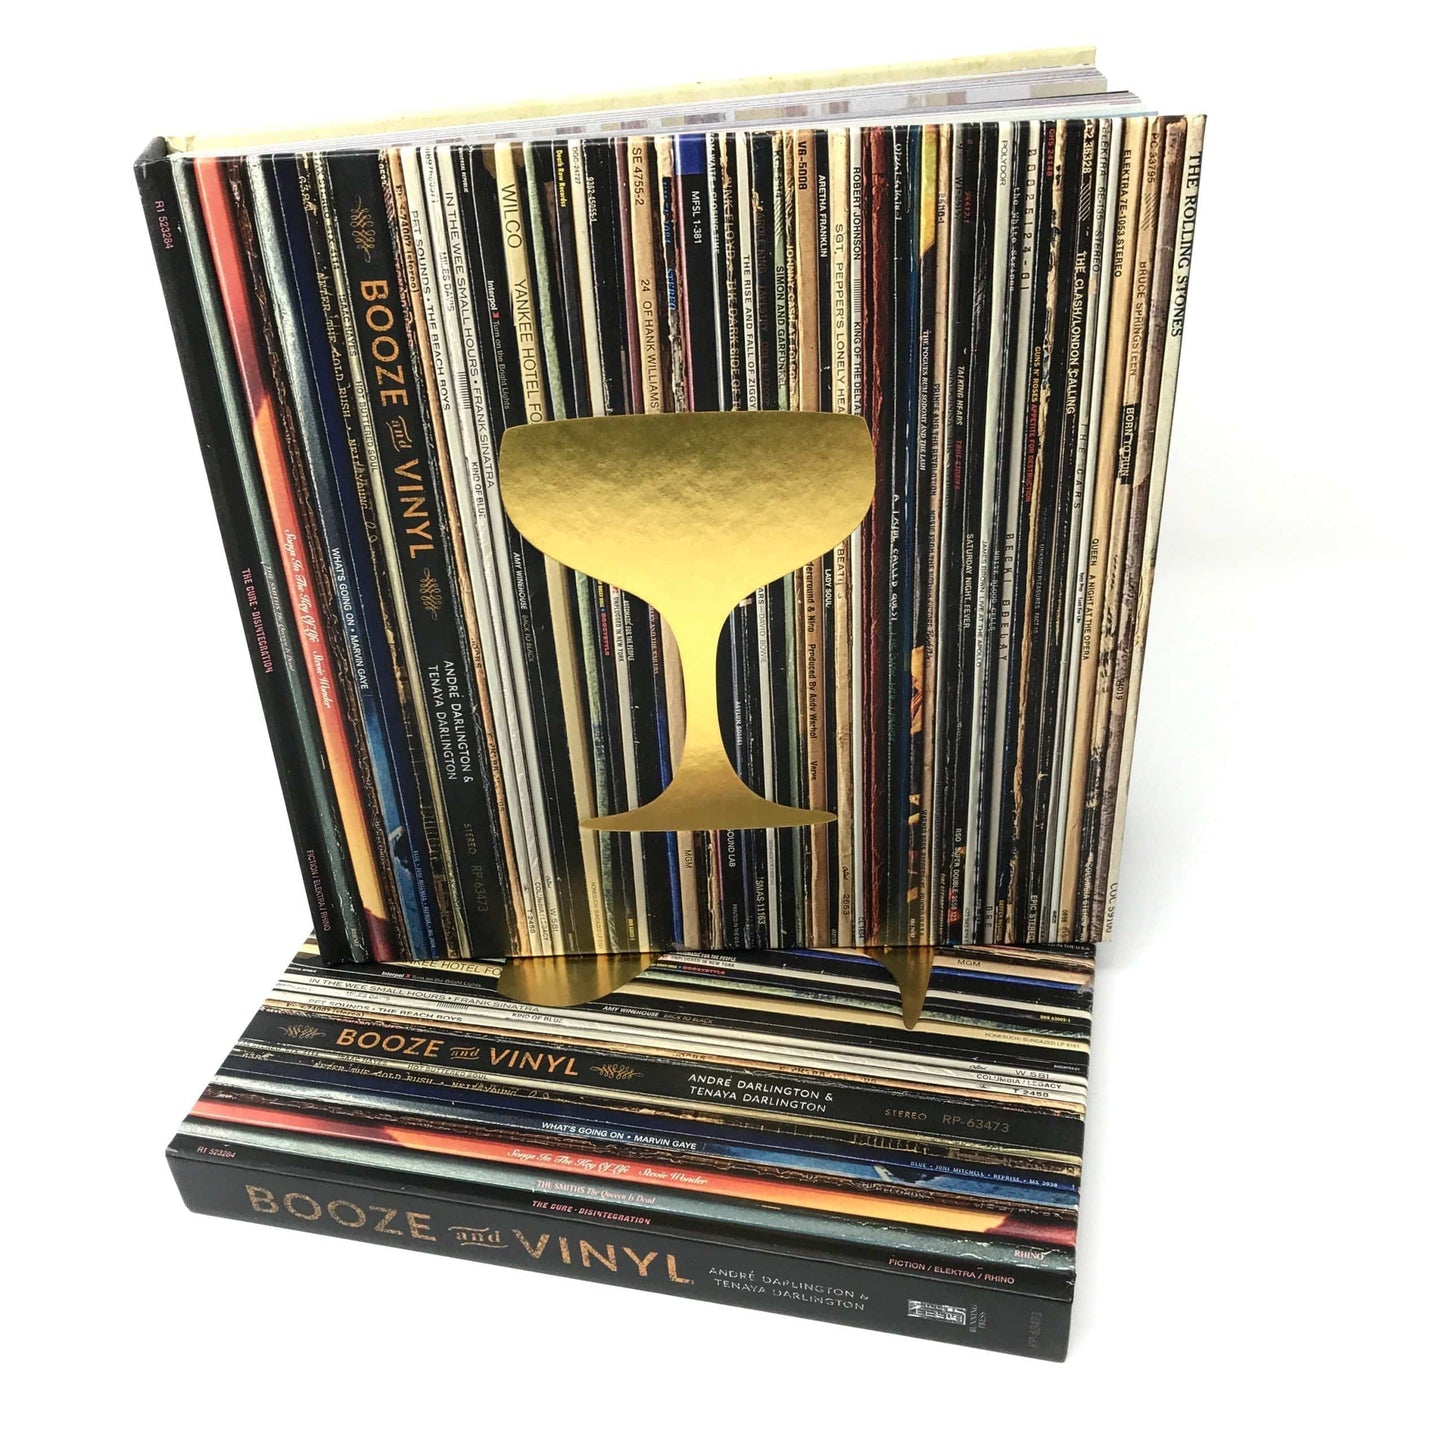 Booze & Vinyl: A Spirited Guide to Great Music and Mixed Drinks - Findlay Rowe Designs